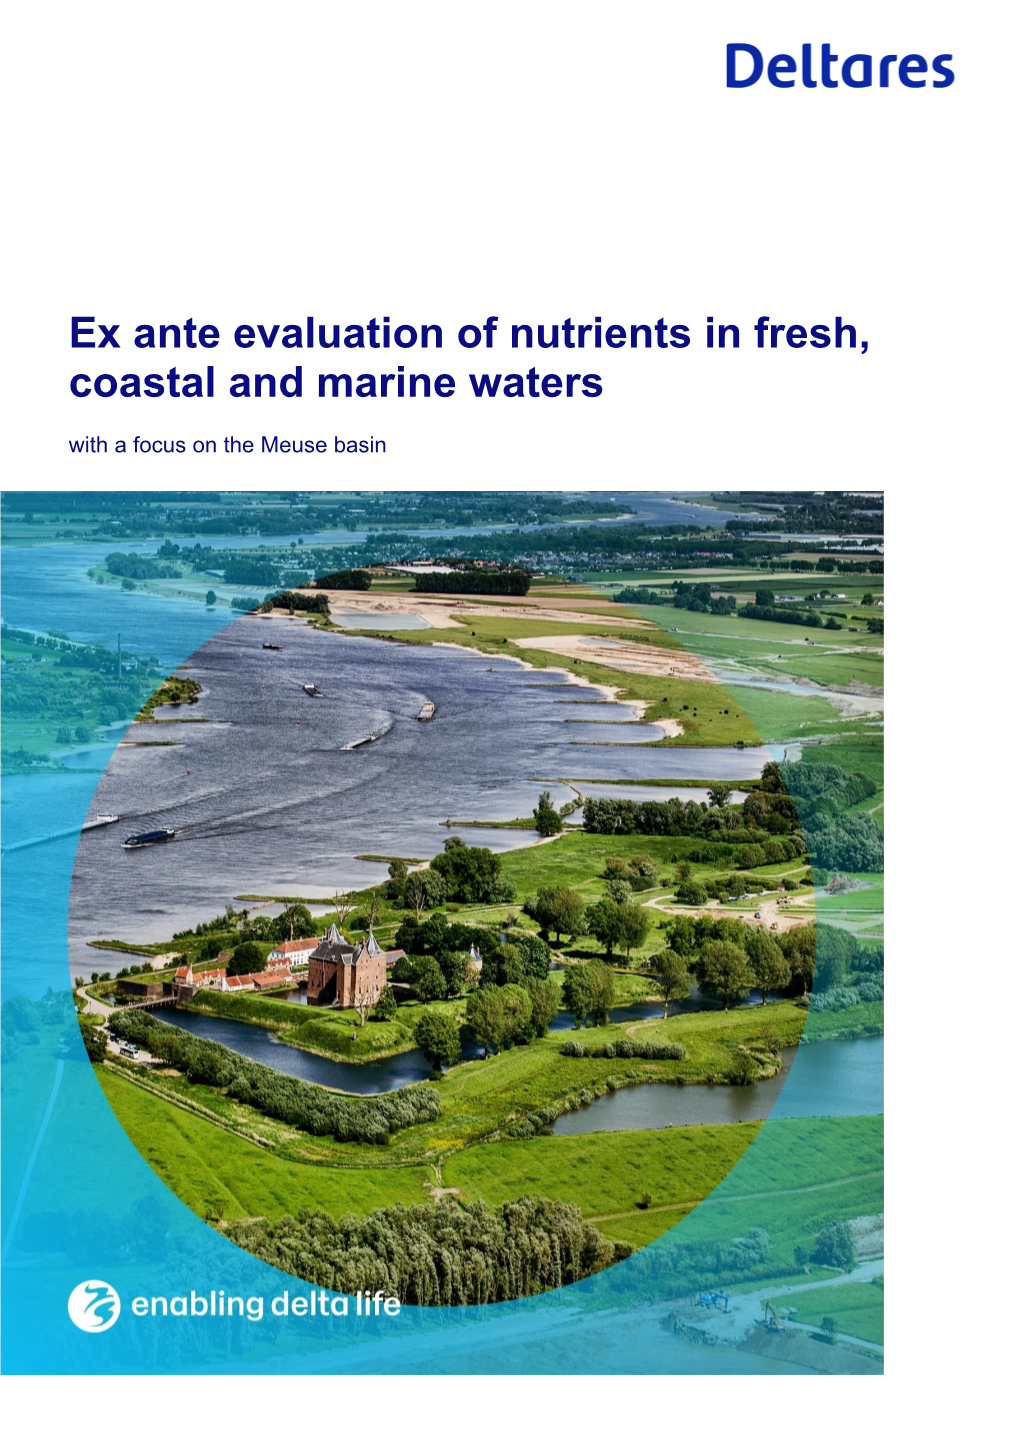 Ex Ante Evaluation of Nutrients in Fresh, Coastal and Marine Waters with a Focus on the Meuse Basin